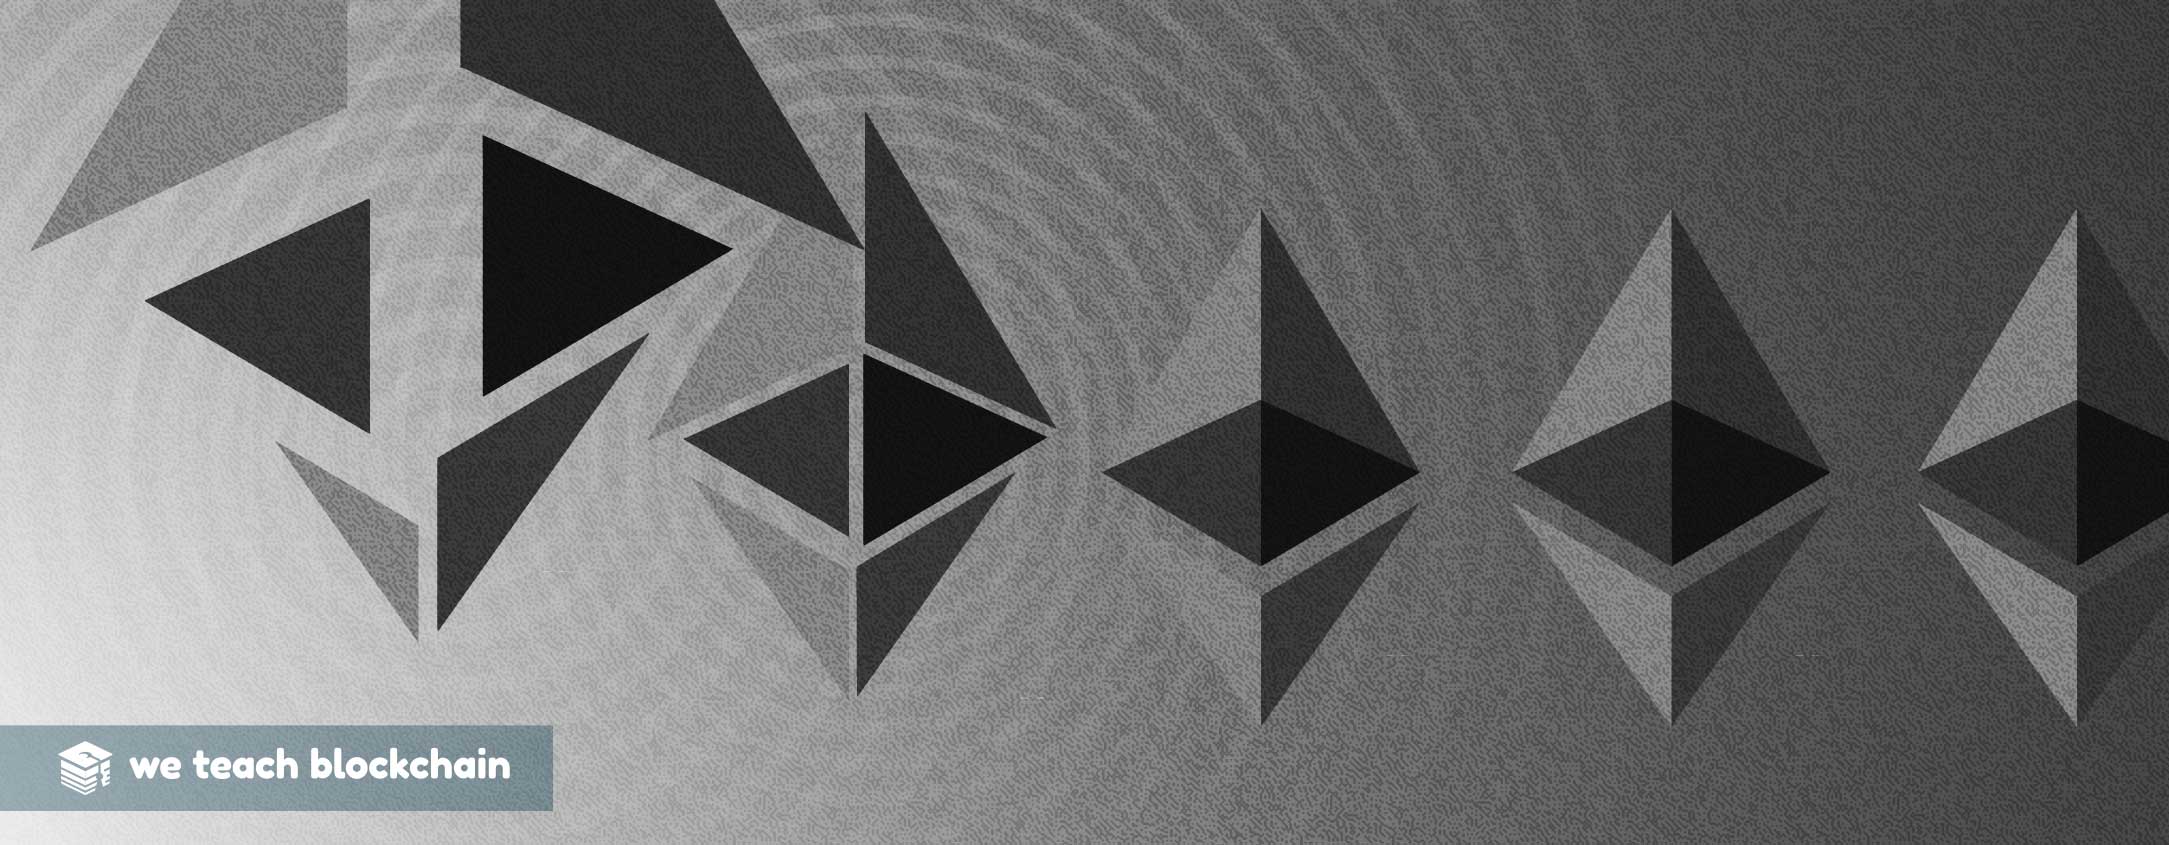 The parts of an Ethereum logo coming together